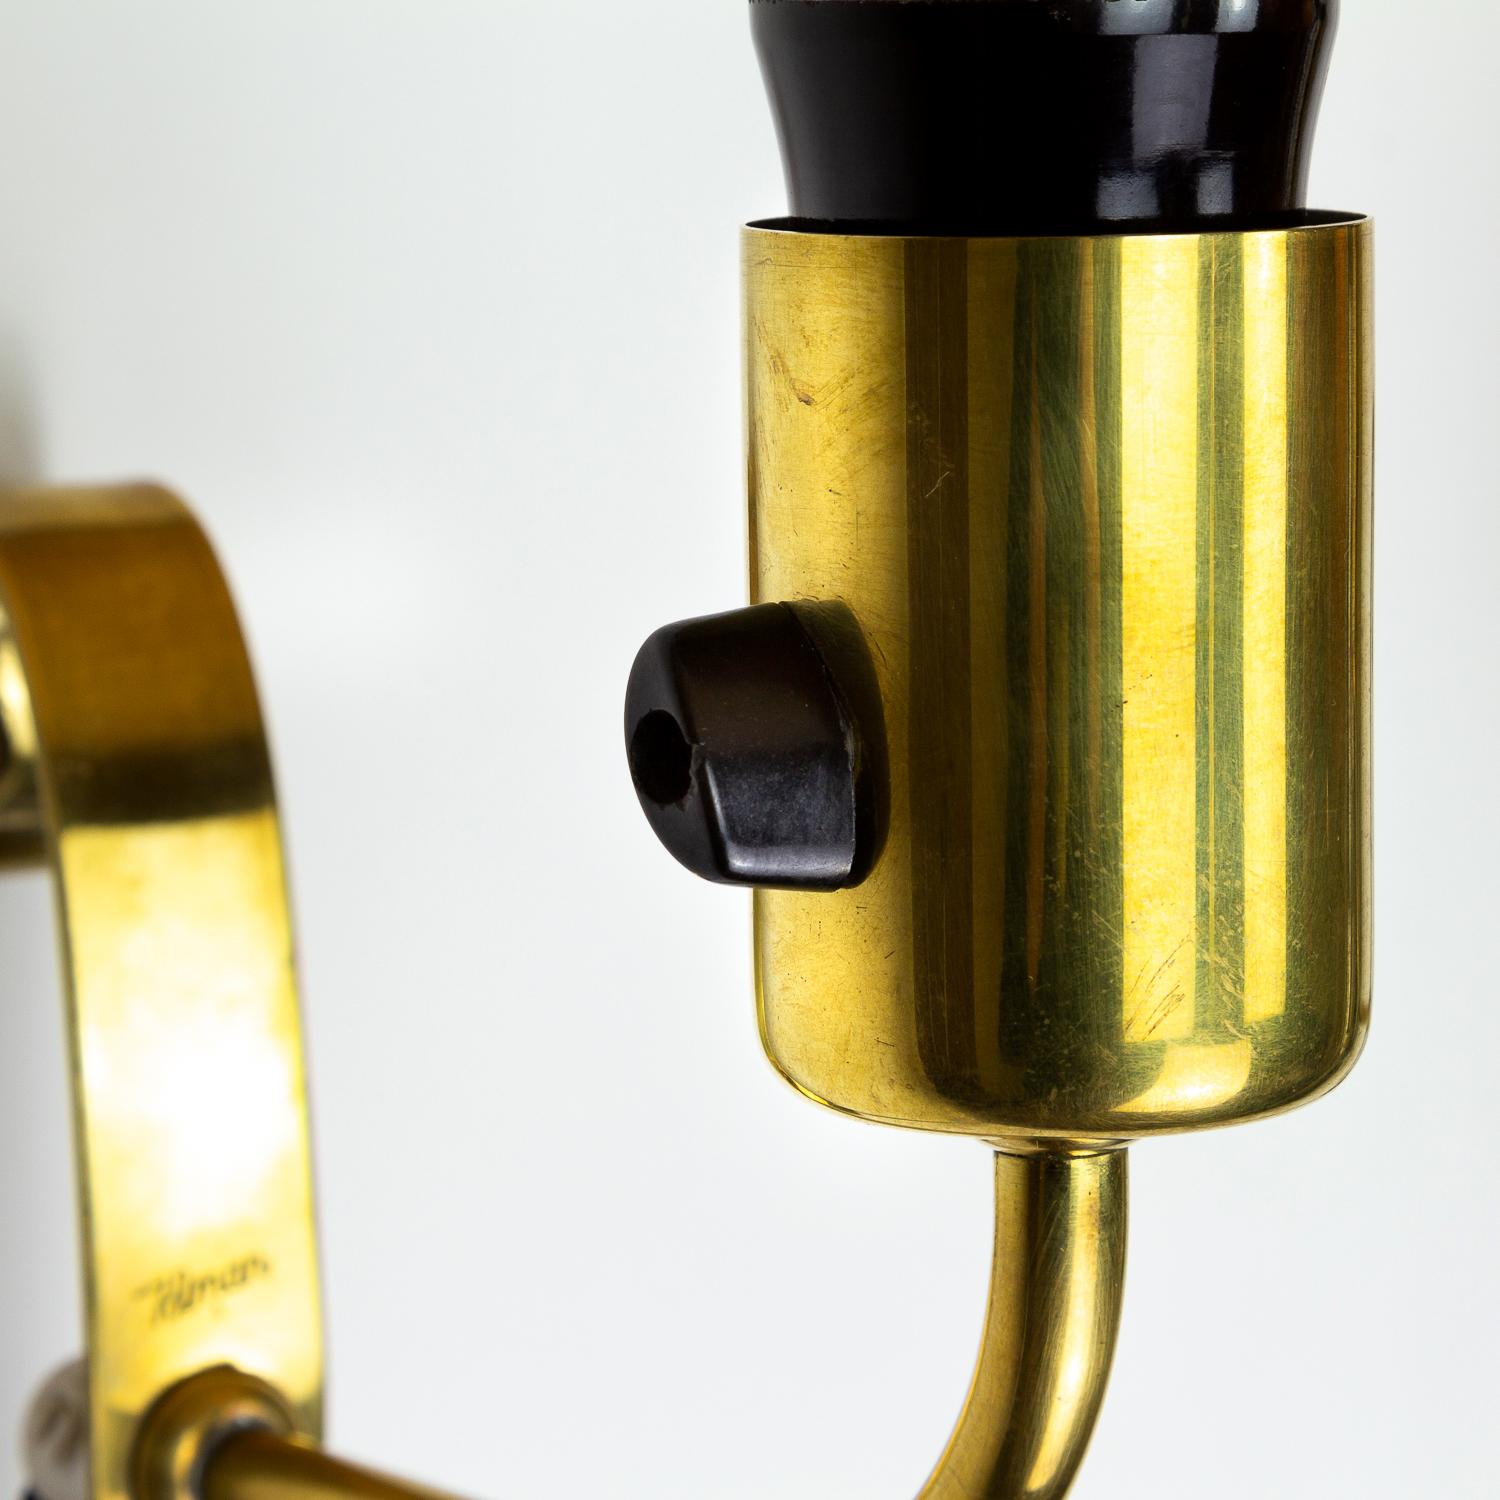 Pair of Midcentury Brass Wall Lights, Maria Lindemann, Idman Oy, Finland, 1950s For Sale 5